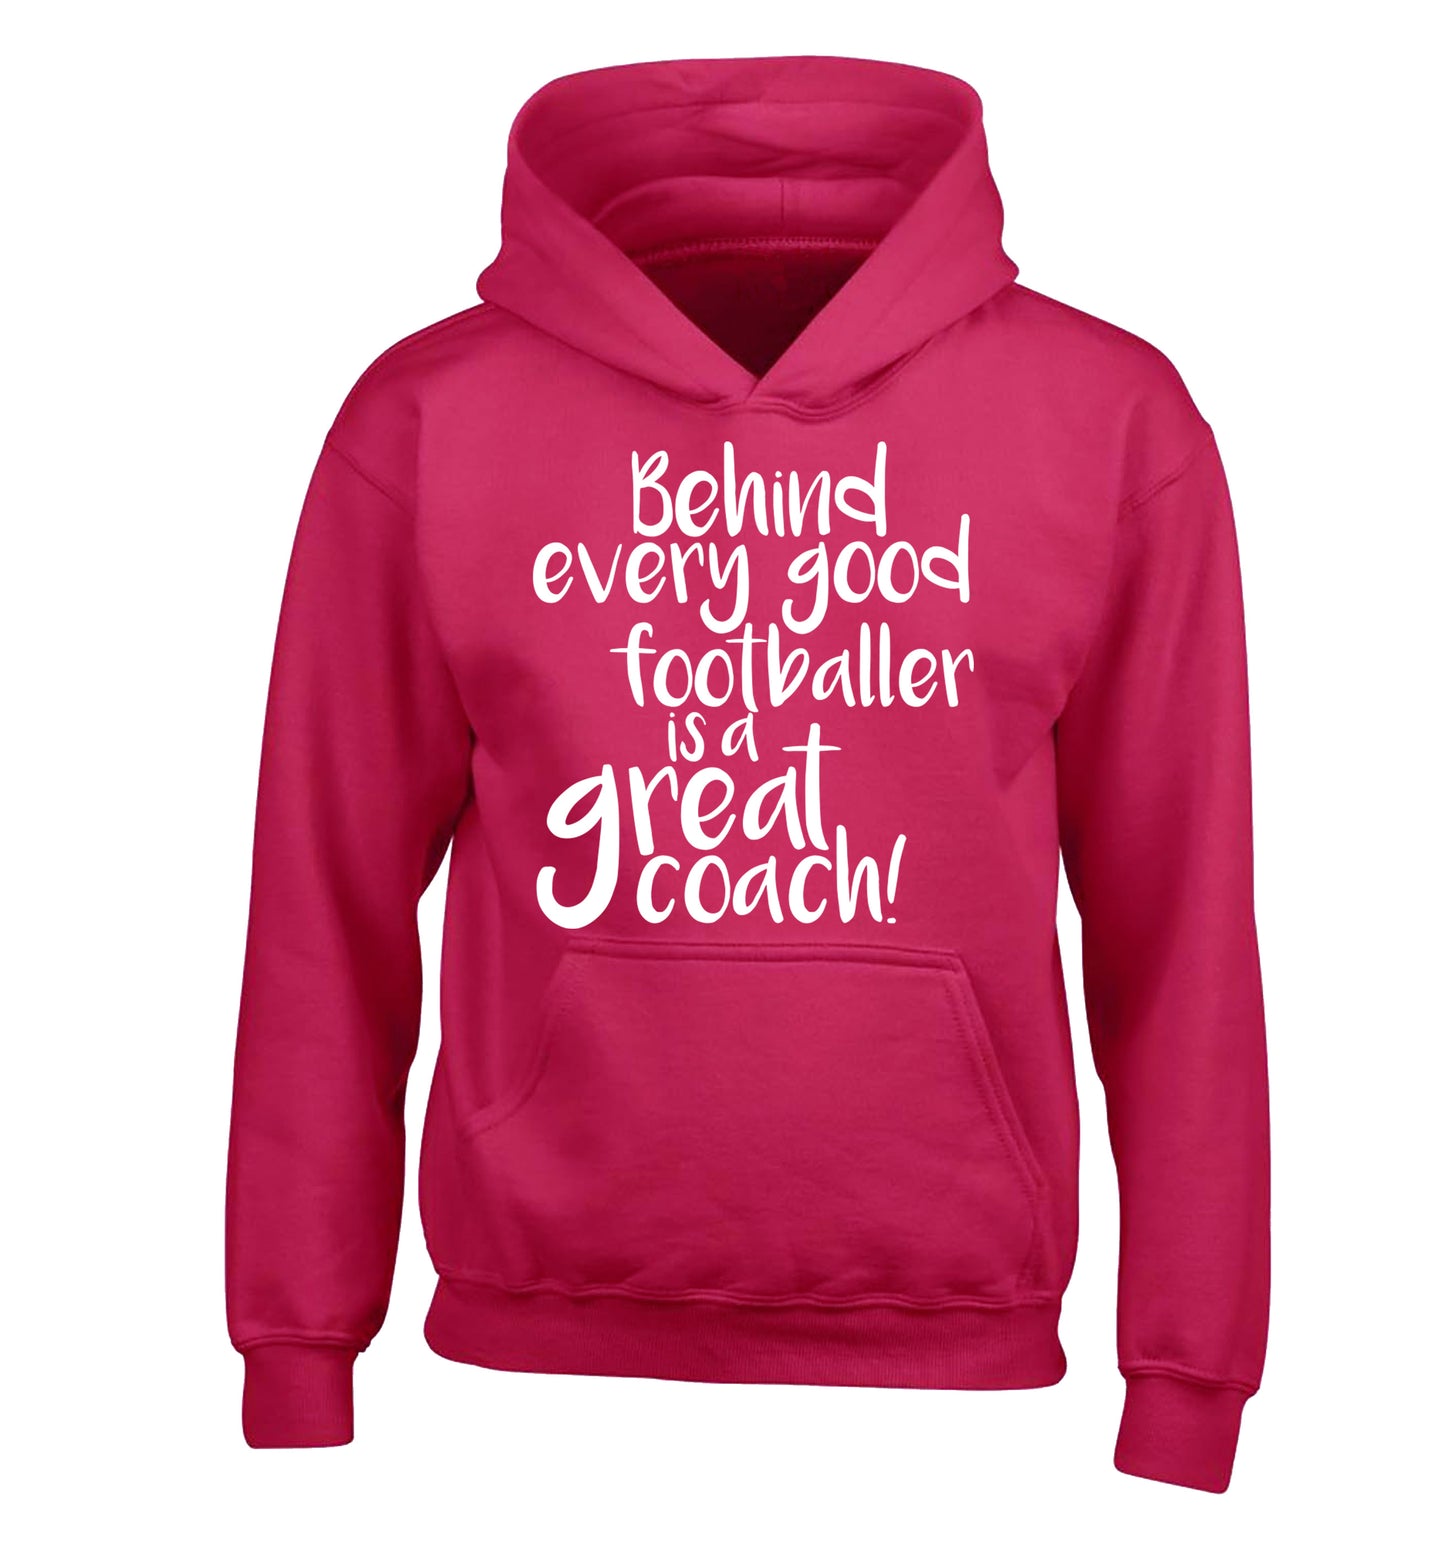 Behind every good footballer is a great coach! children's pink hoodie 12-14 Years